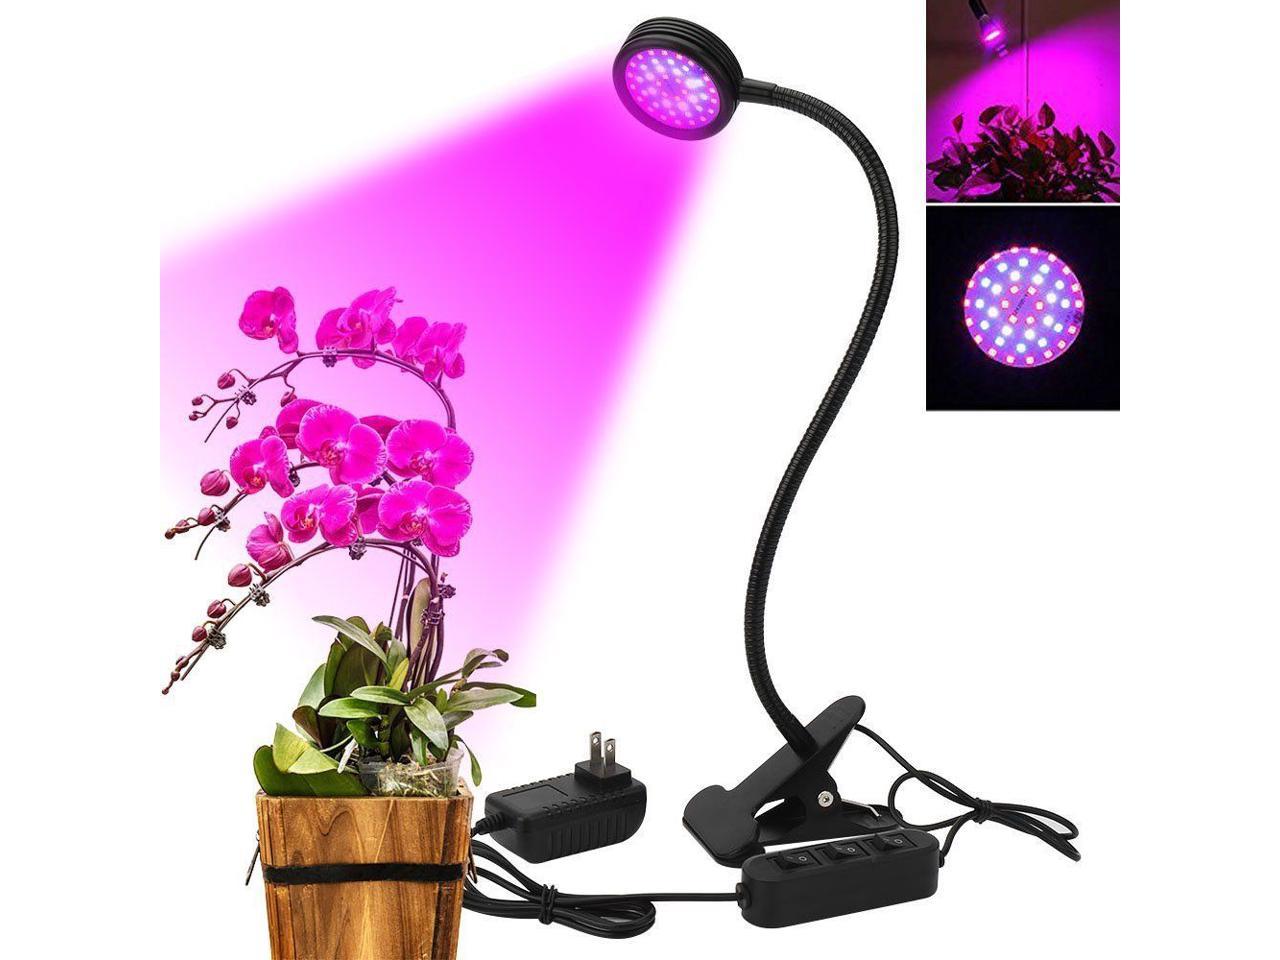 LED Grow Light For Greenhouse Hydroponic Indoor Plants With Ultra Thin Panel 20W 